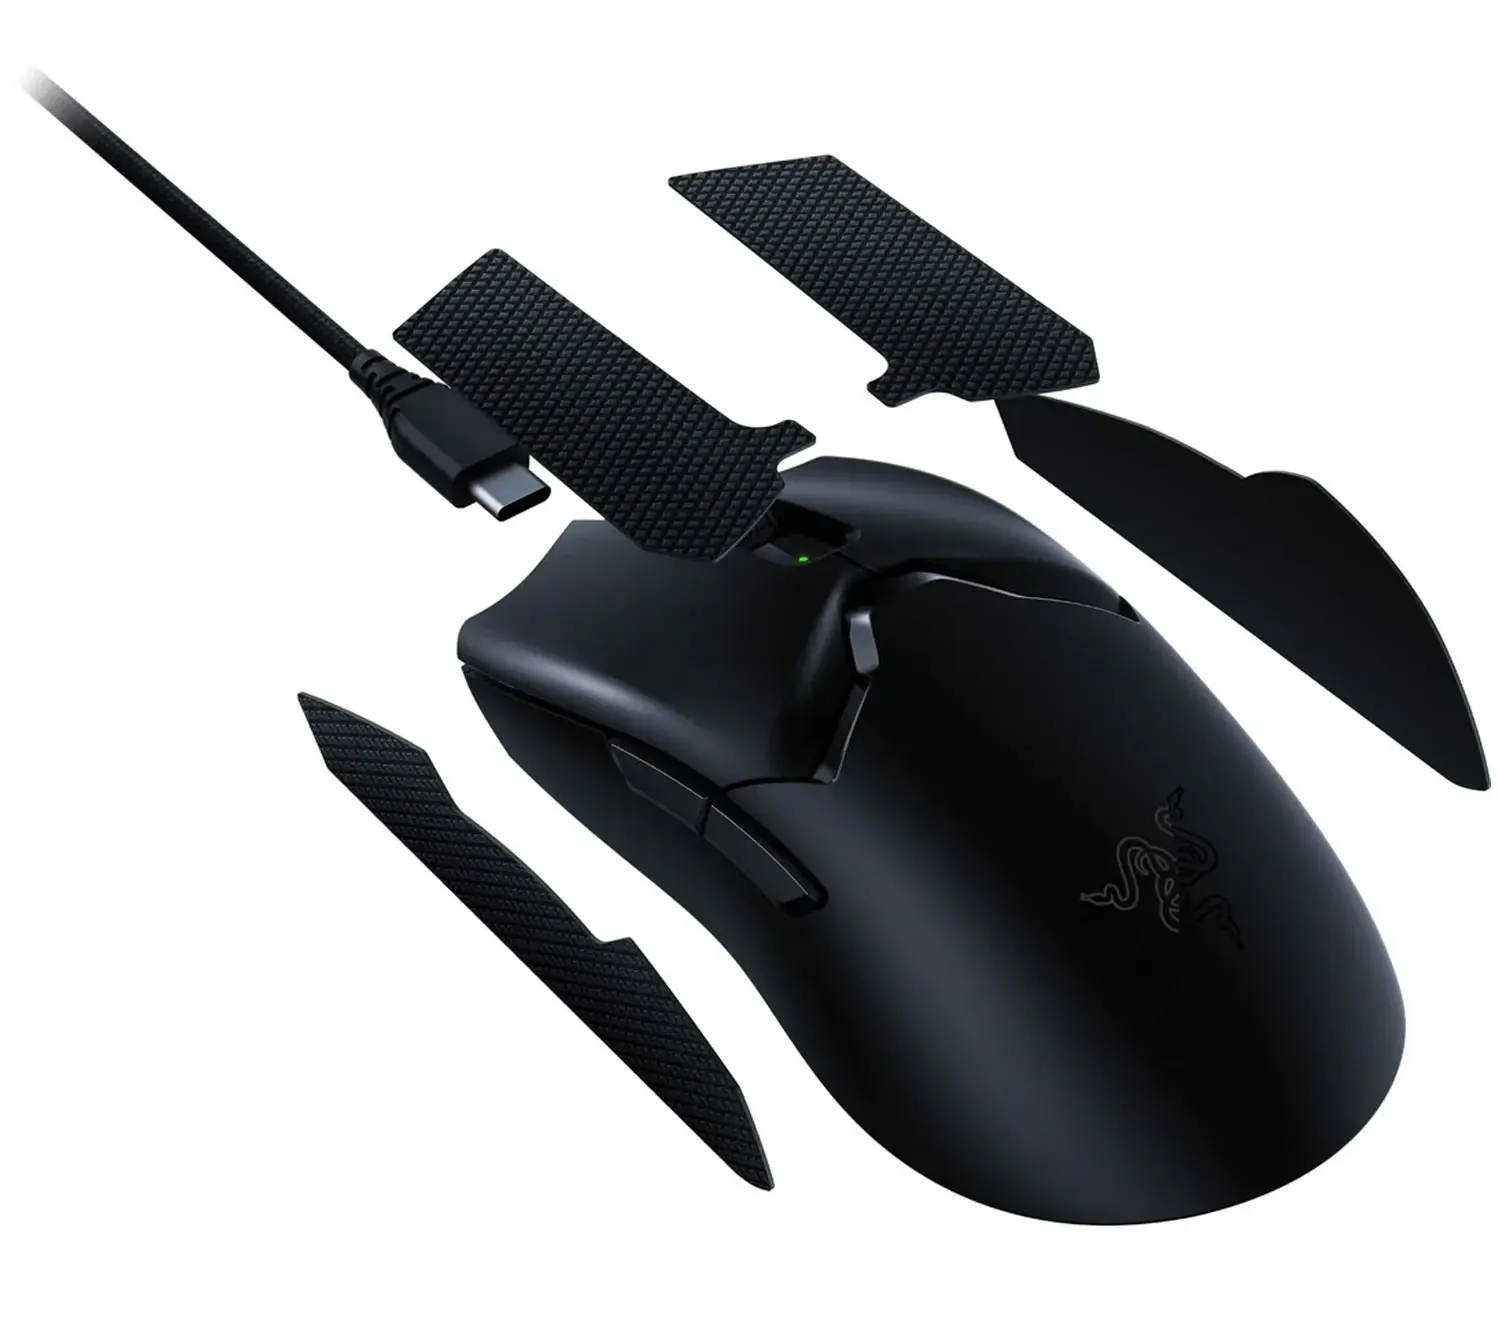 Razer Viper V2 Pro Lightweight Wireless Optical Gaming Mouse with